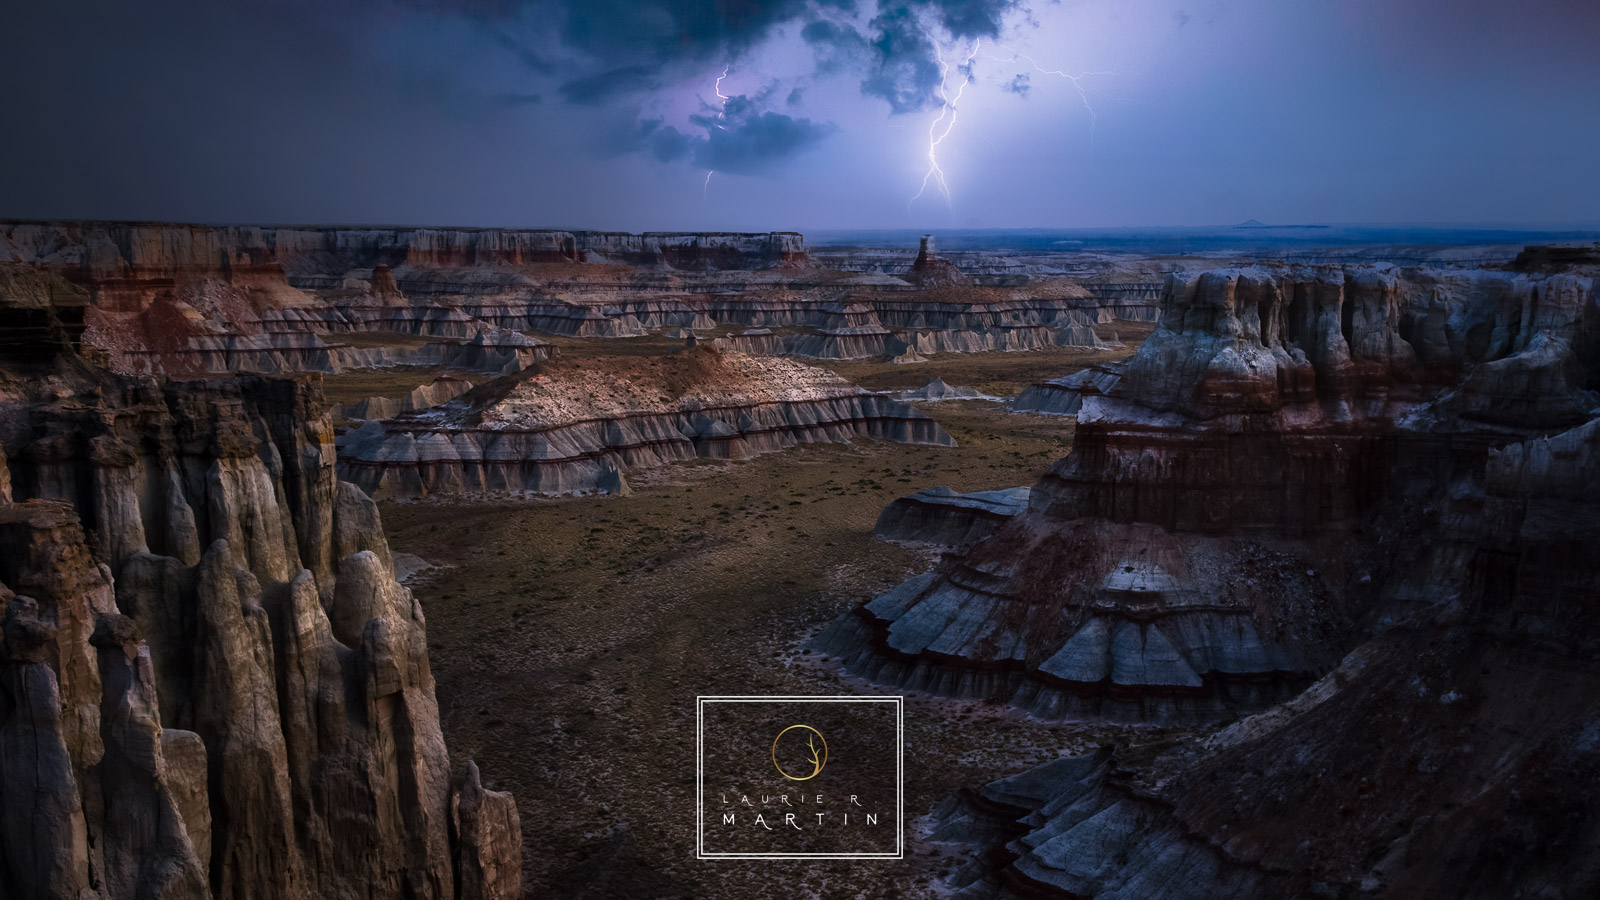 The Canyons are beautiful after a hard rain. Monsoon season brings in some epic storms. Once the stone and Canyon Walls are saturated...